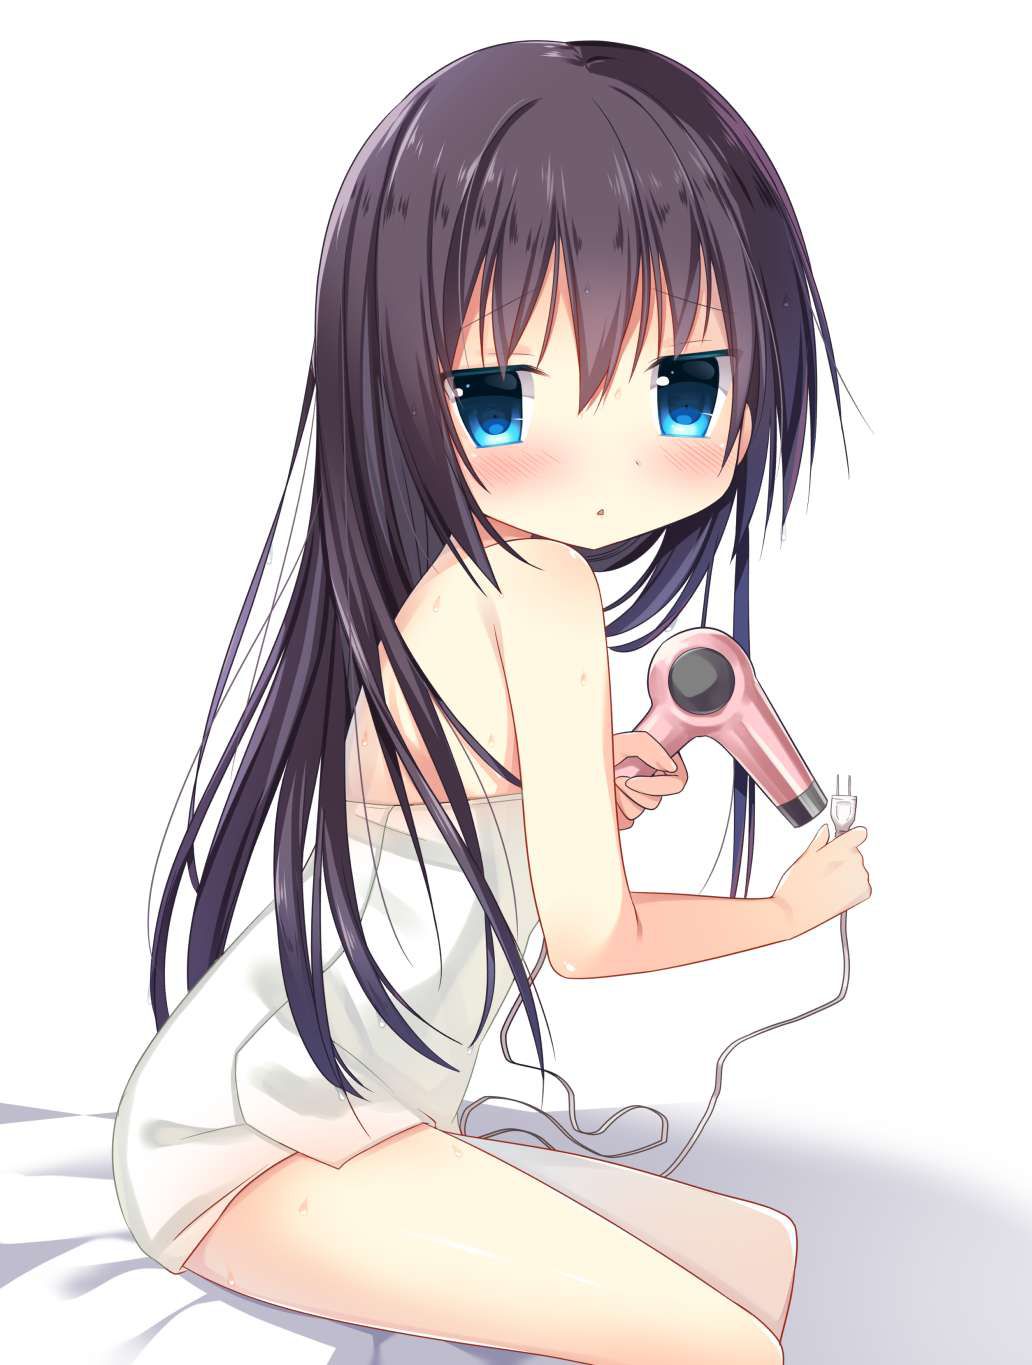 Secondary erotic image of a girl after a bath drying her hair with a hair dryer 16